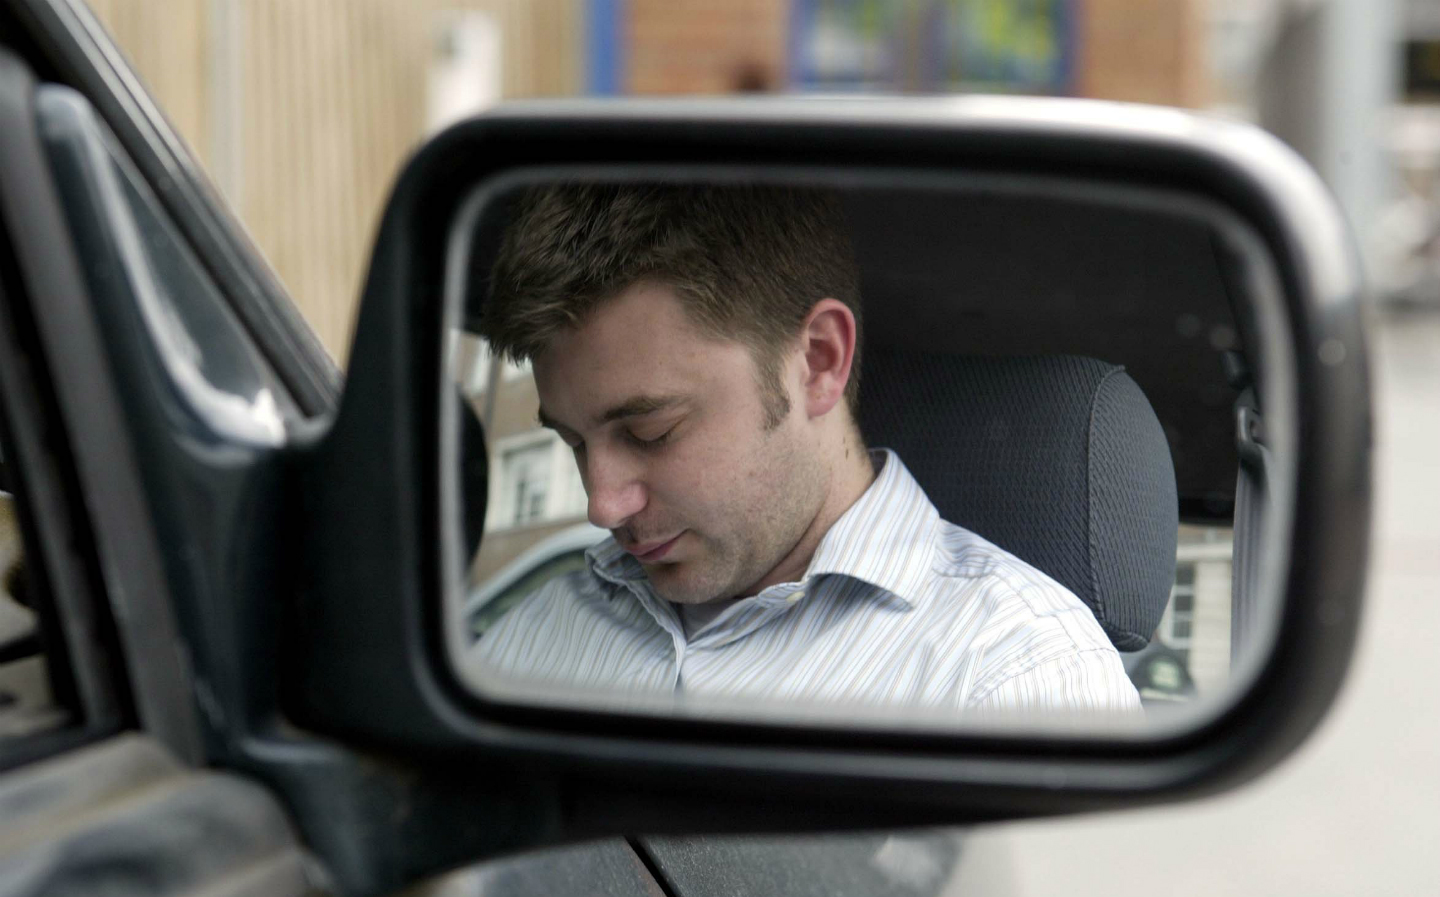 Tiredness at wheel is like drink-driving, say researchers